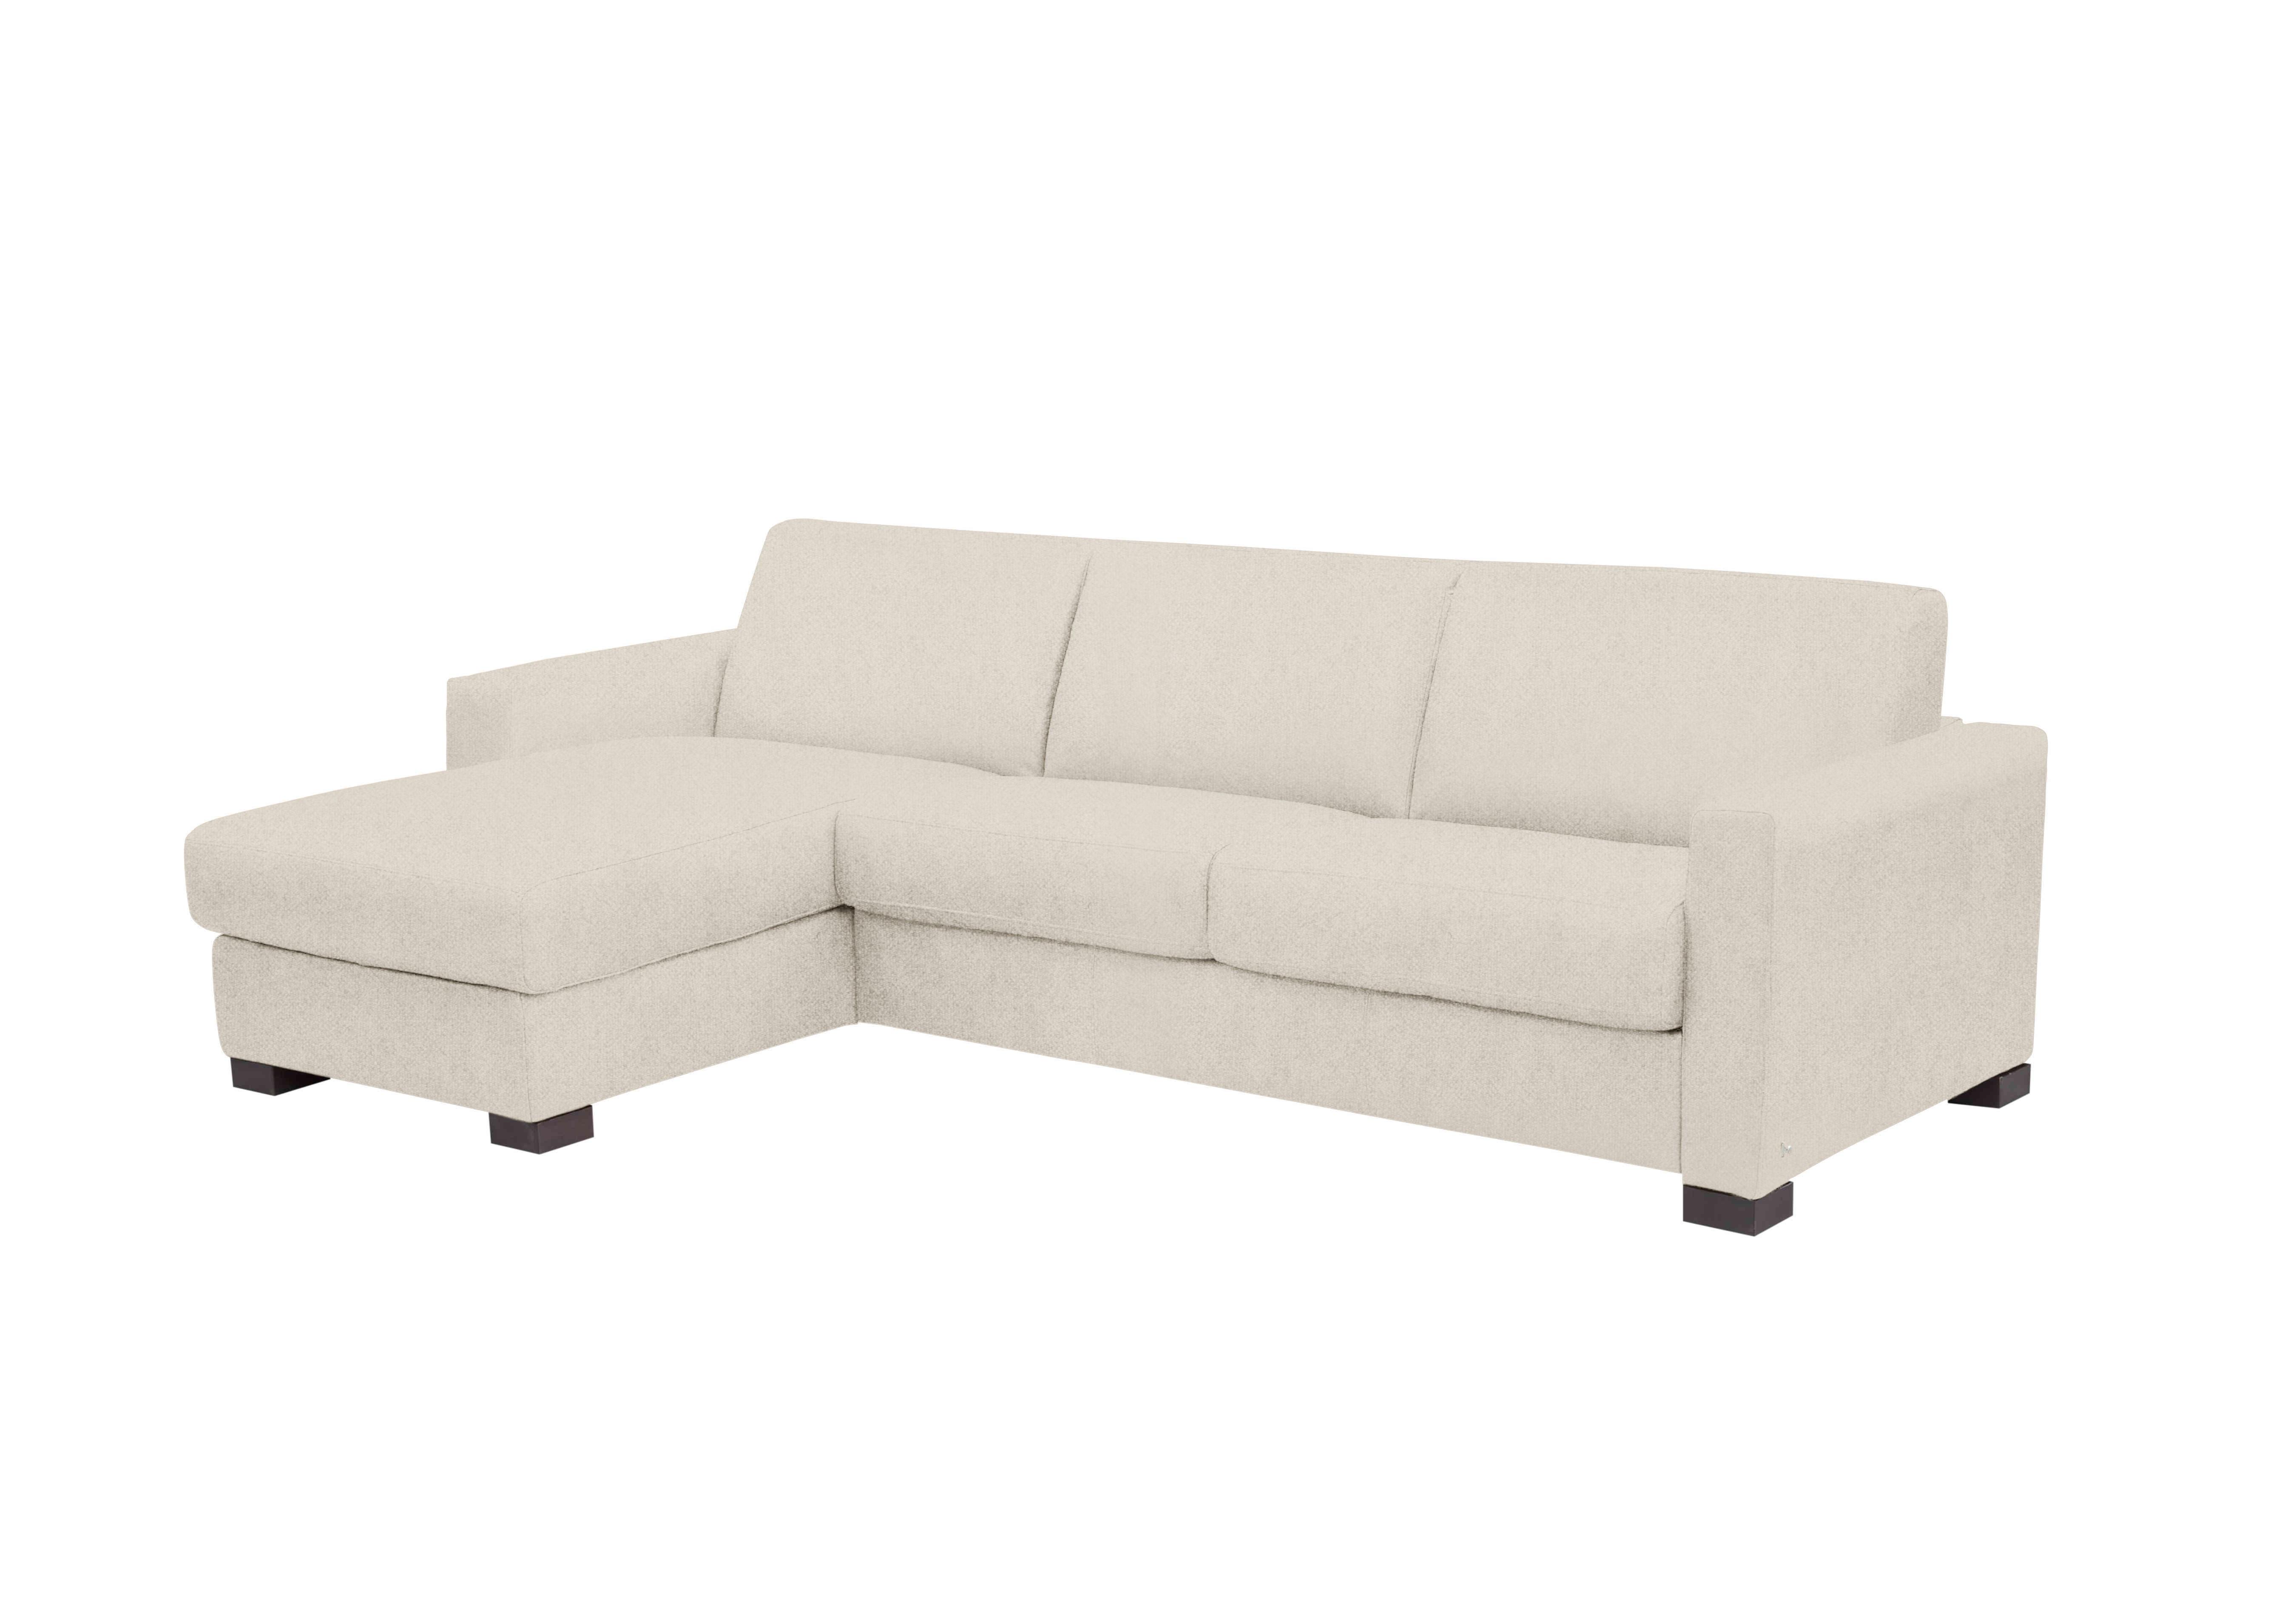 Alcova 3 Seater Fabric Sofa Bed with Storage Chaise with Box Arms in Fuente Beige on Furniture Village